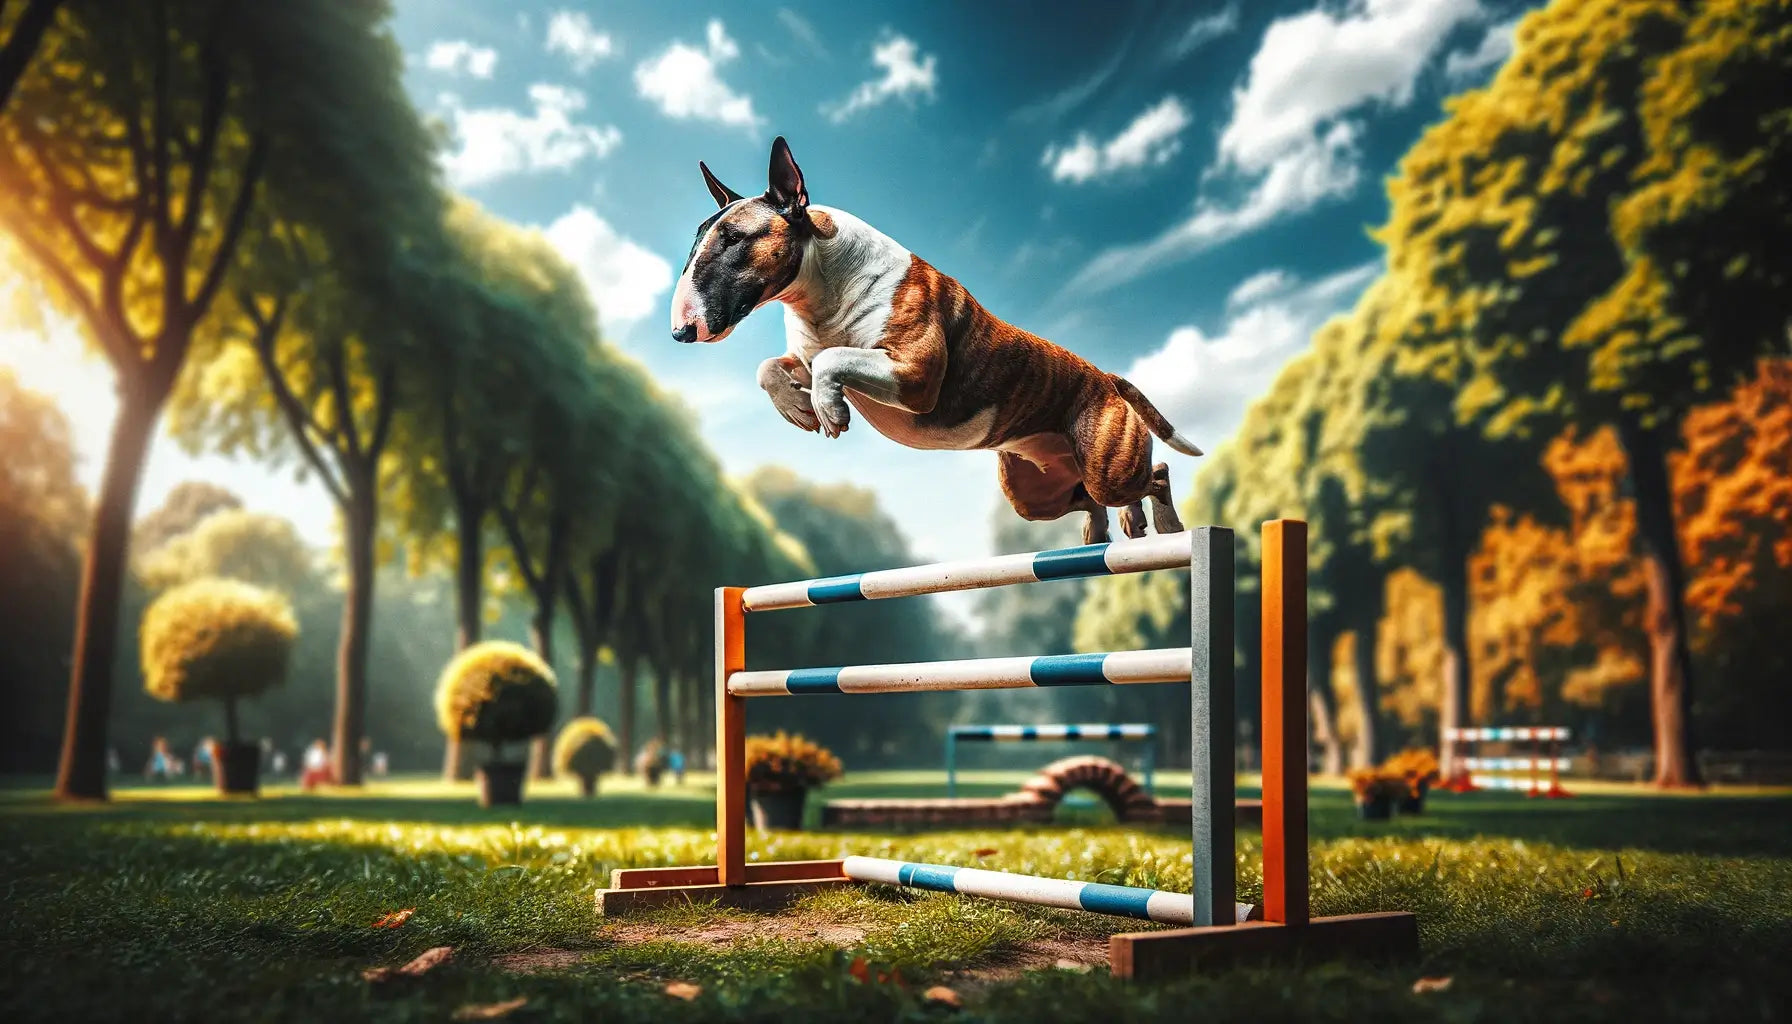 A Bull Terrier leaps over a hurdle in a scenic outdoor park, demonstrating agility and strength.